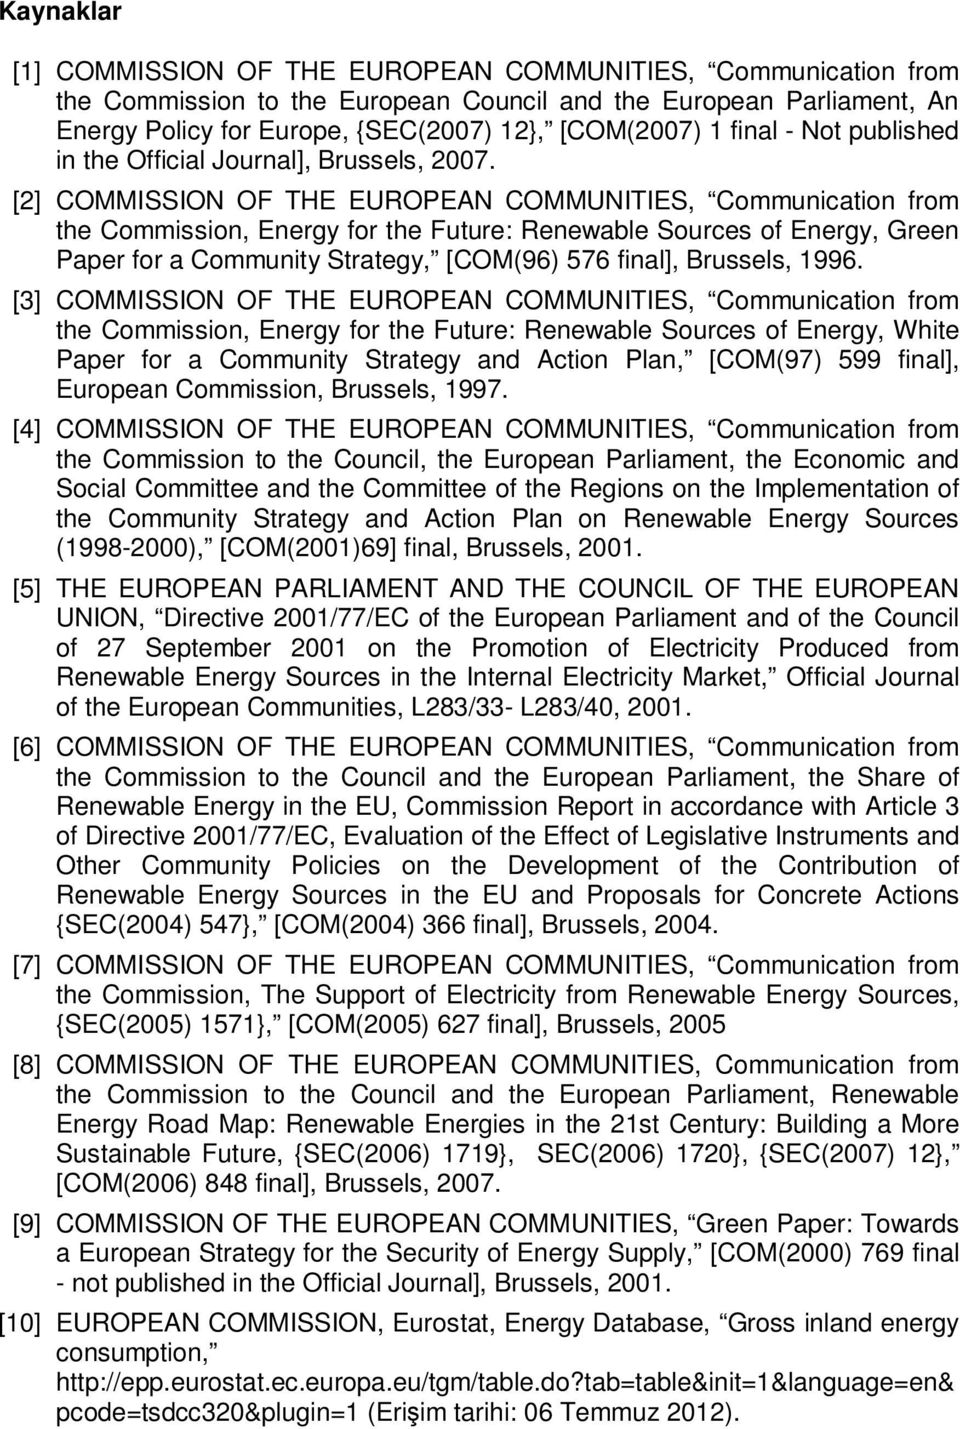 [2] COMMISSION OF THE EUROPEAN COMMUNITIES, Communication from the Commission, Energy for the Future: Renewable Sources of Energy, Green Paper for a Community Strategy, [COM(96) 576 final], Brussels,